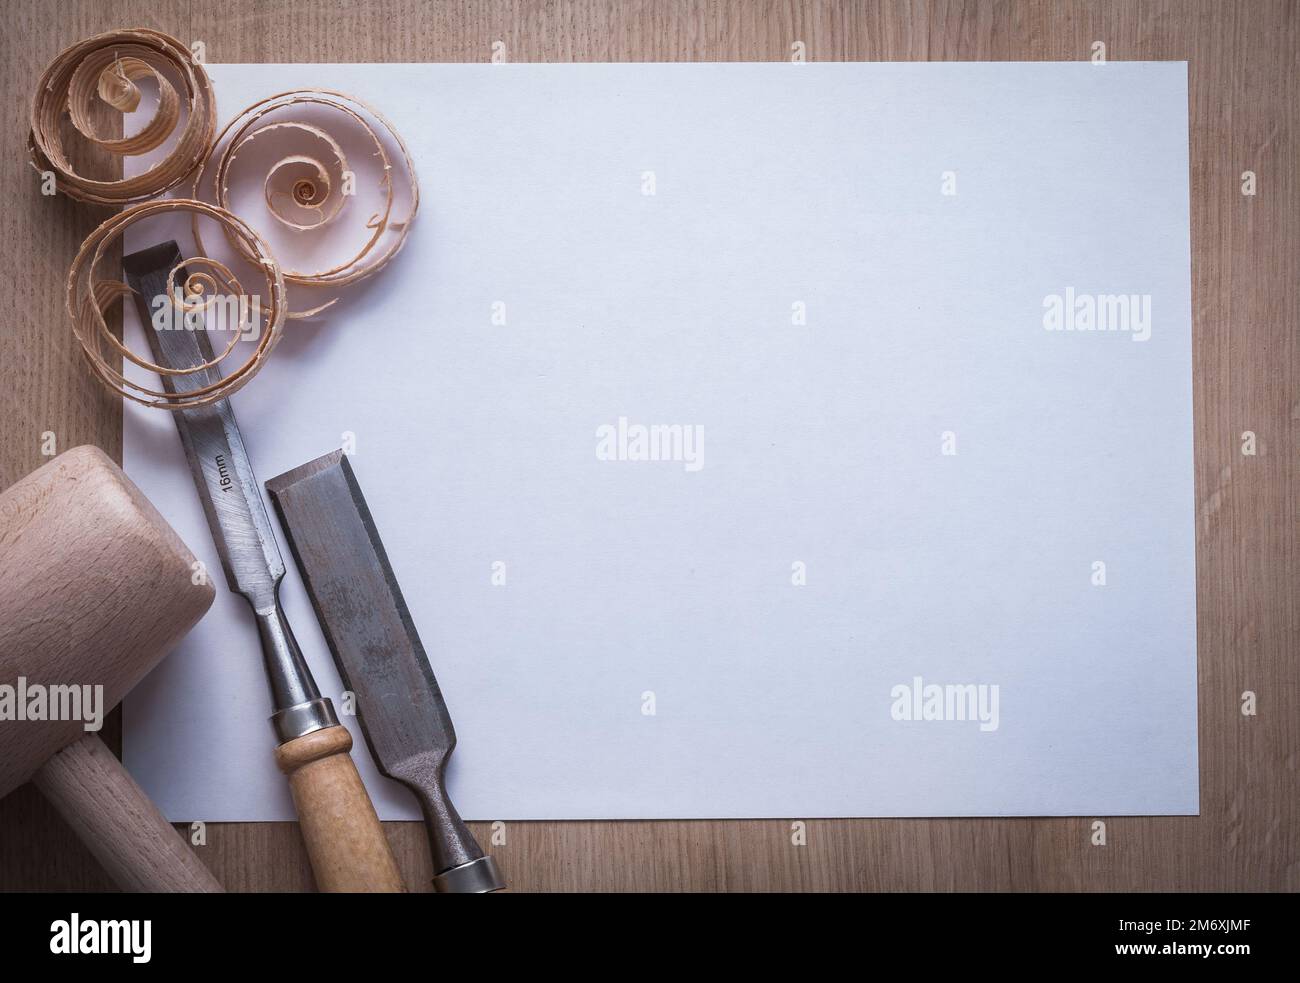 Curled wooden shavings firmer chisels lump hammer and blank sheet of paper on wood board copyspace image construction concept. Stock Photo